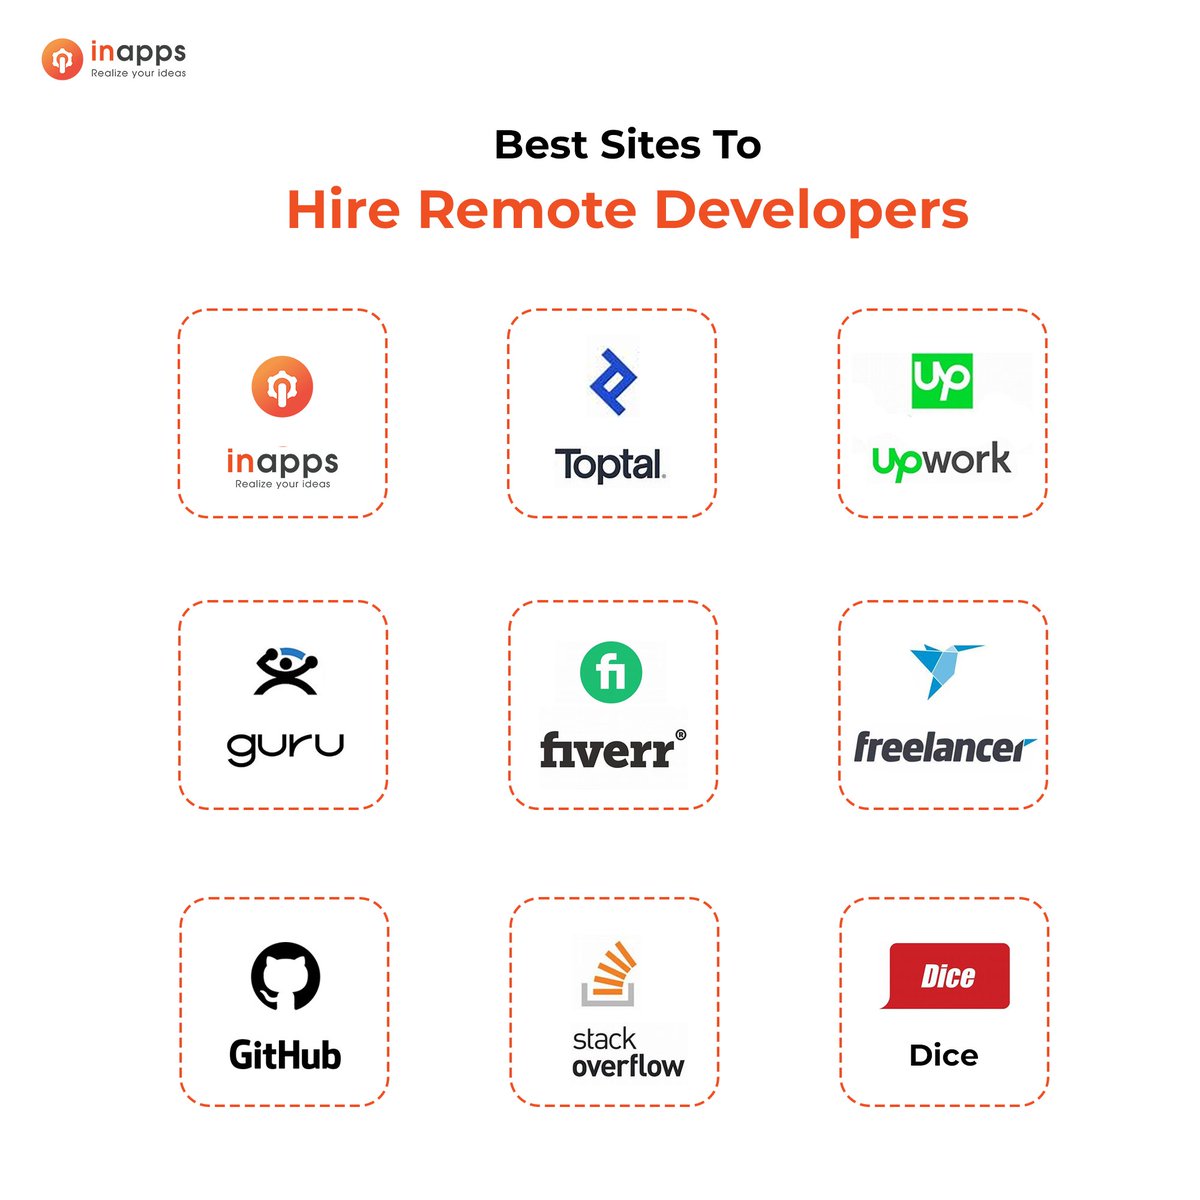 Finding the RIGHT remote developers for your team takes time.

Here are 13 sites to help you find the right remote developers (pros & cons explained): inapps.net/hire-remote-de…

#softwaredevelopment #remotedevelopers